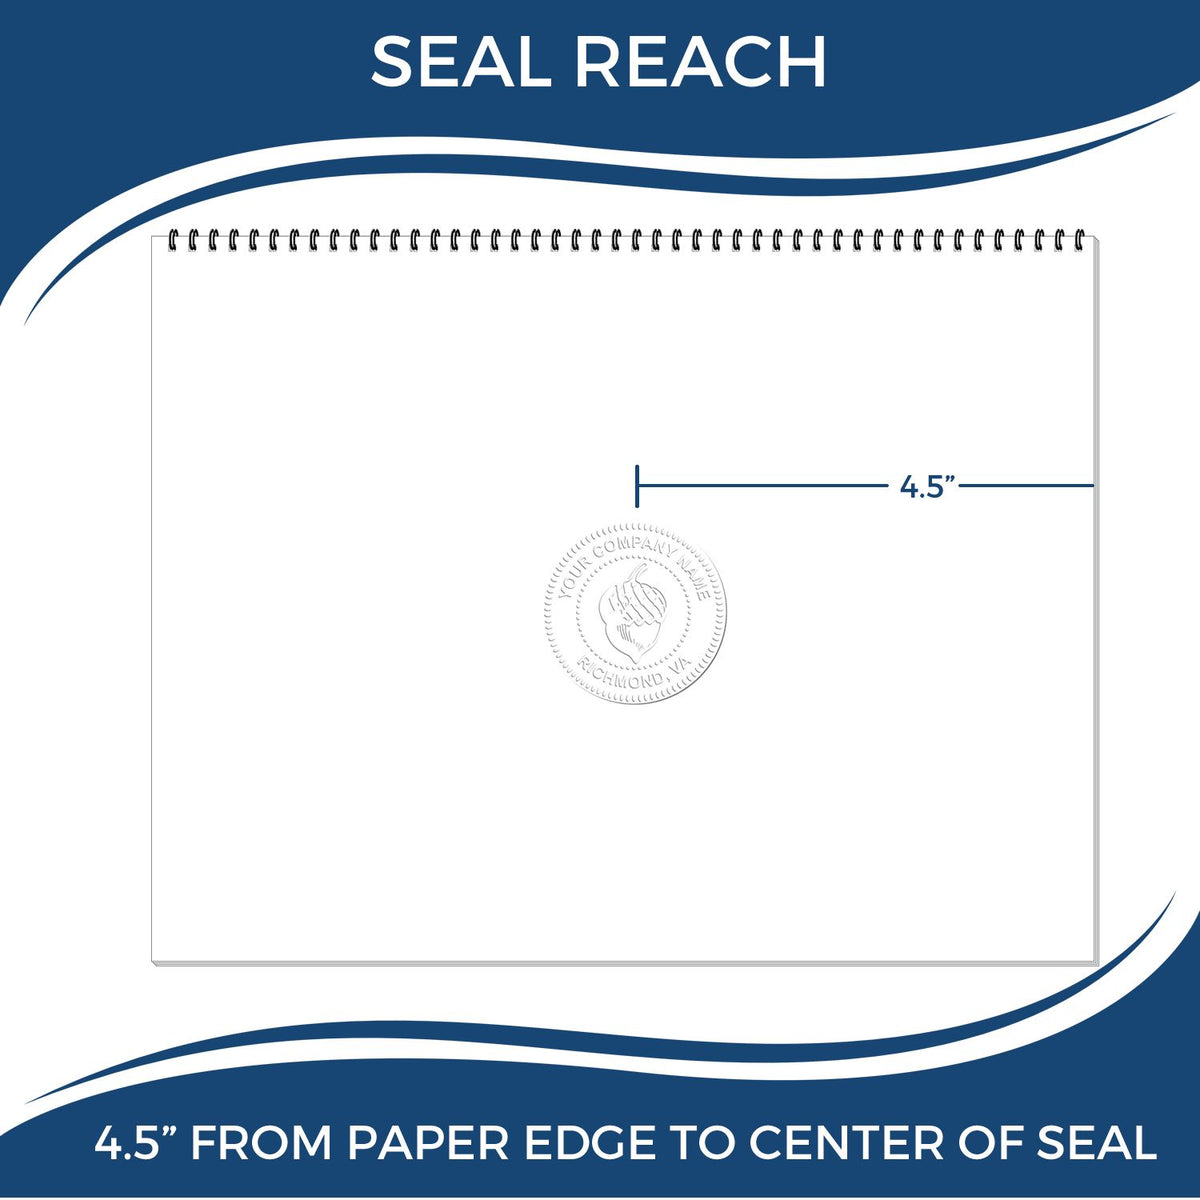 An infographic showing the seal reach which is represented by a ruler and a miniature seal image of the Extended Long Reach Oklahoma Architect Seal Embosser